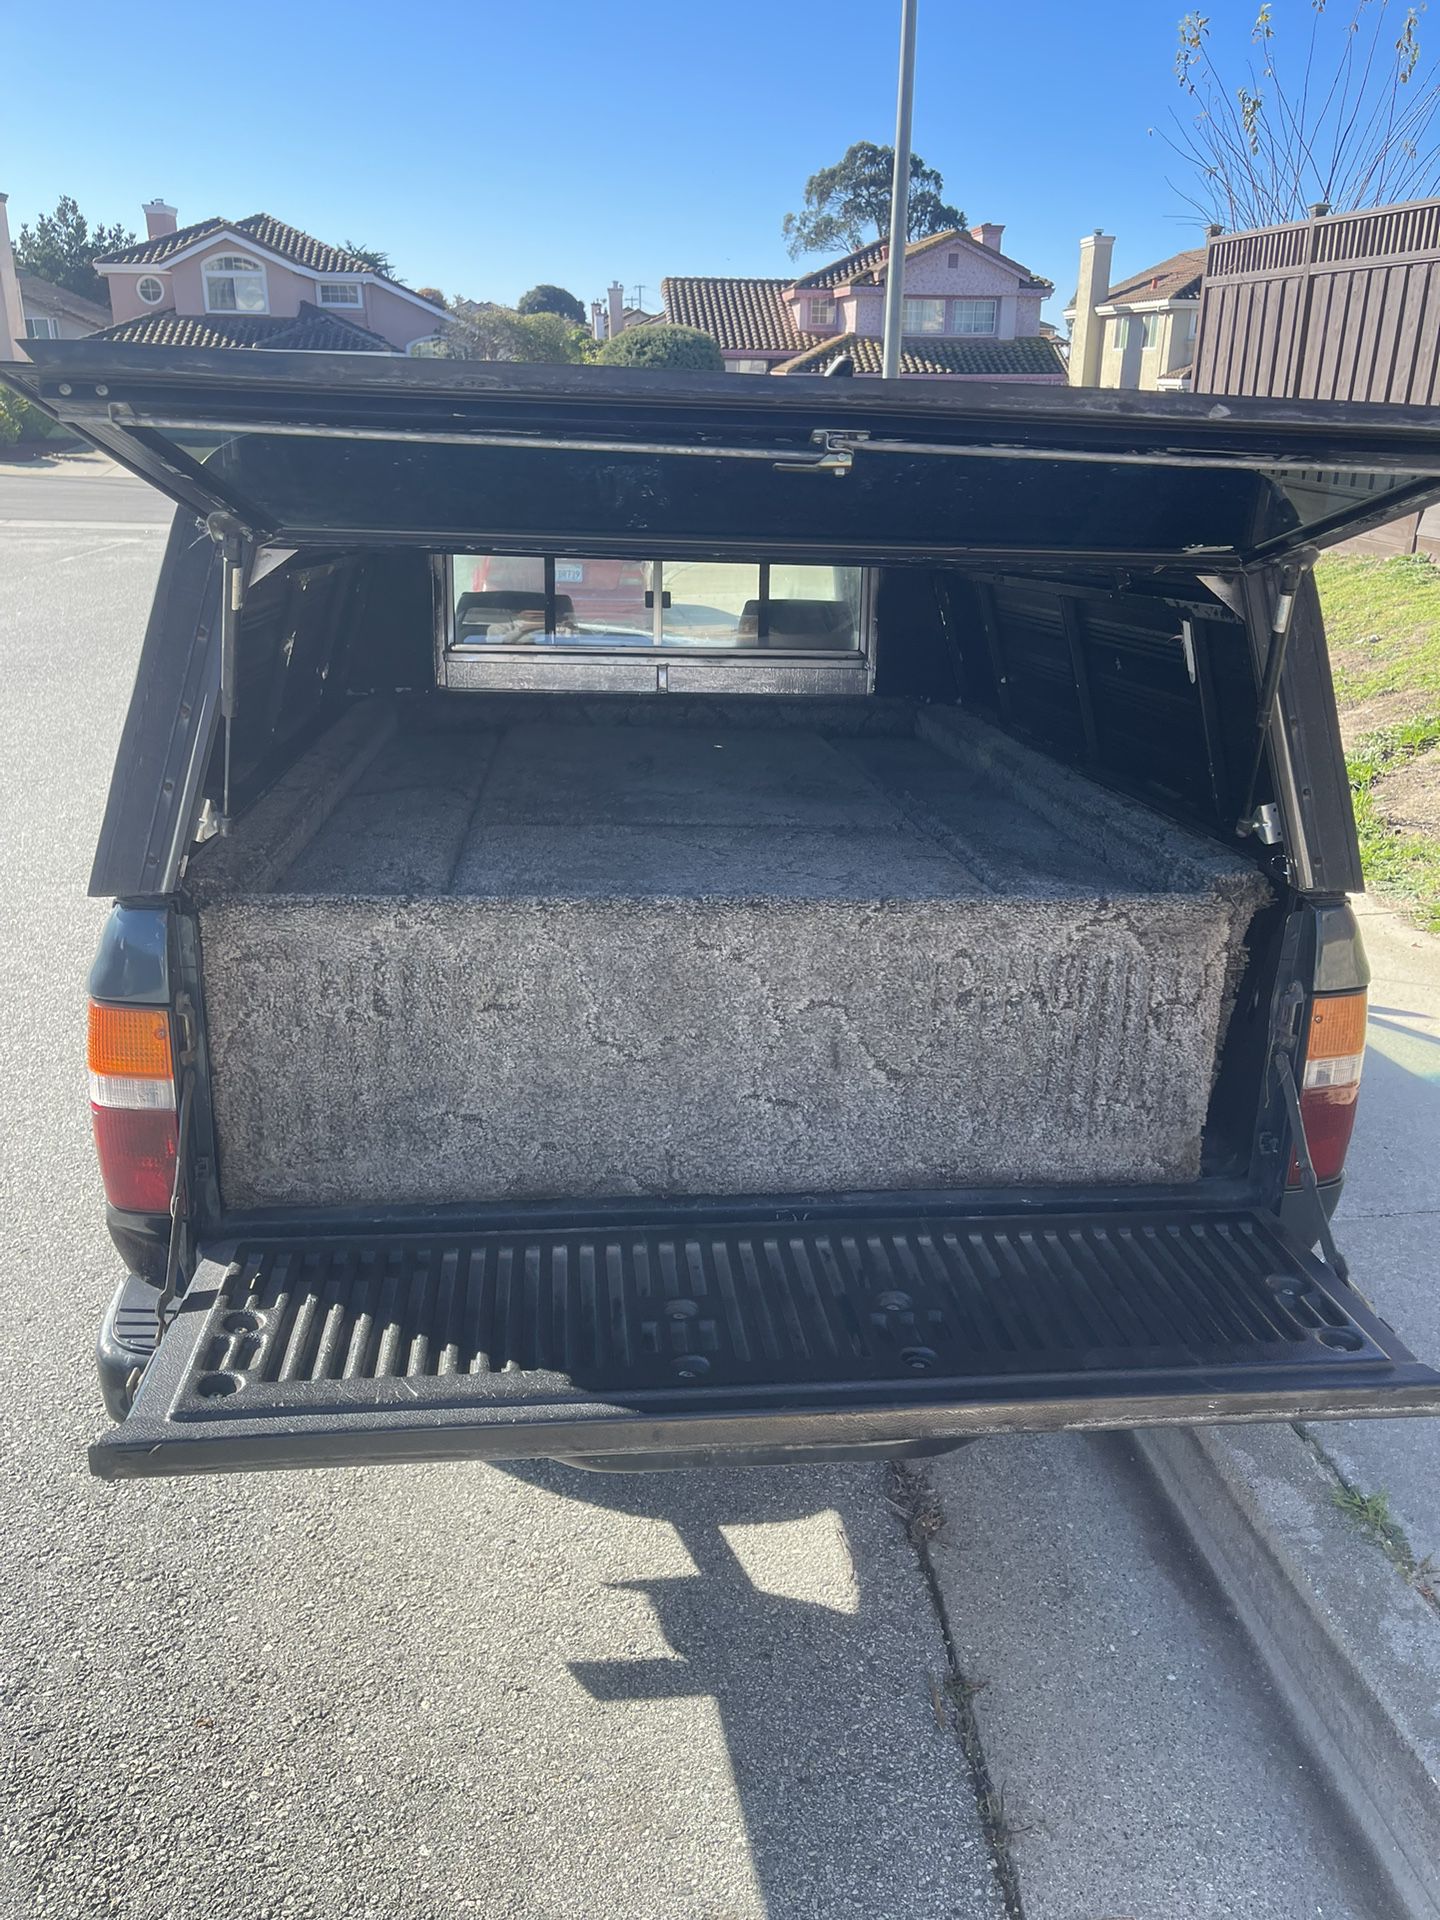 Camper Bed For Small Truck